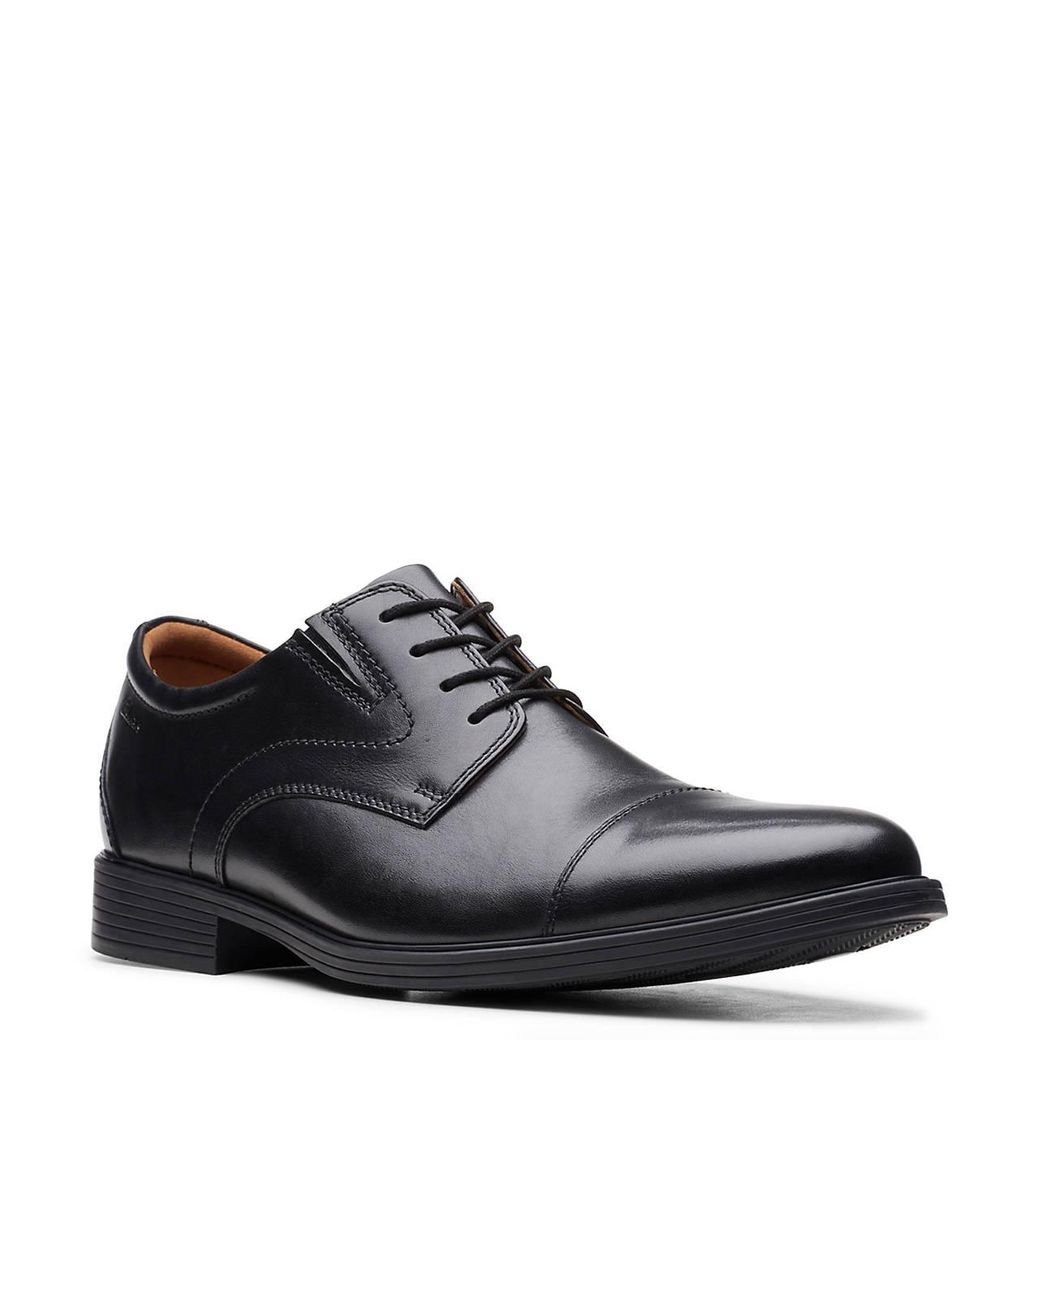 Clarks Leather Whiddon Oxford in Black for Men - Lyst